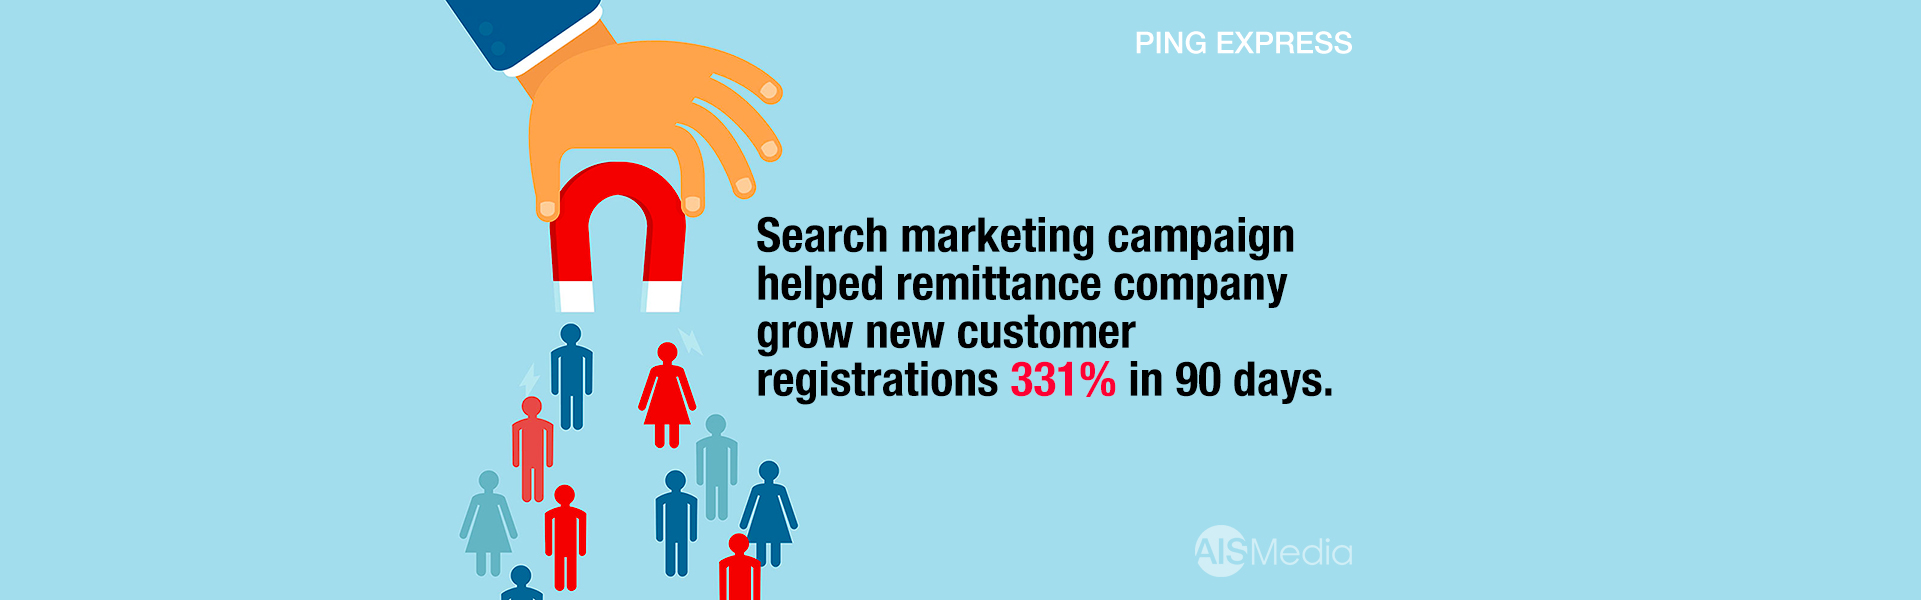 Search marketing campaign helped remittance company grow new customer registrations 331 percent